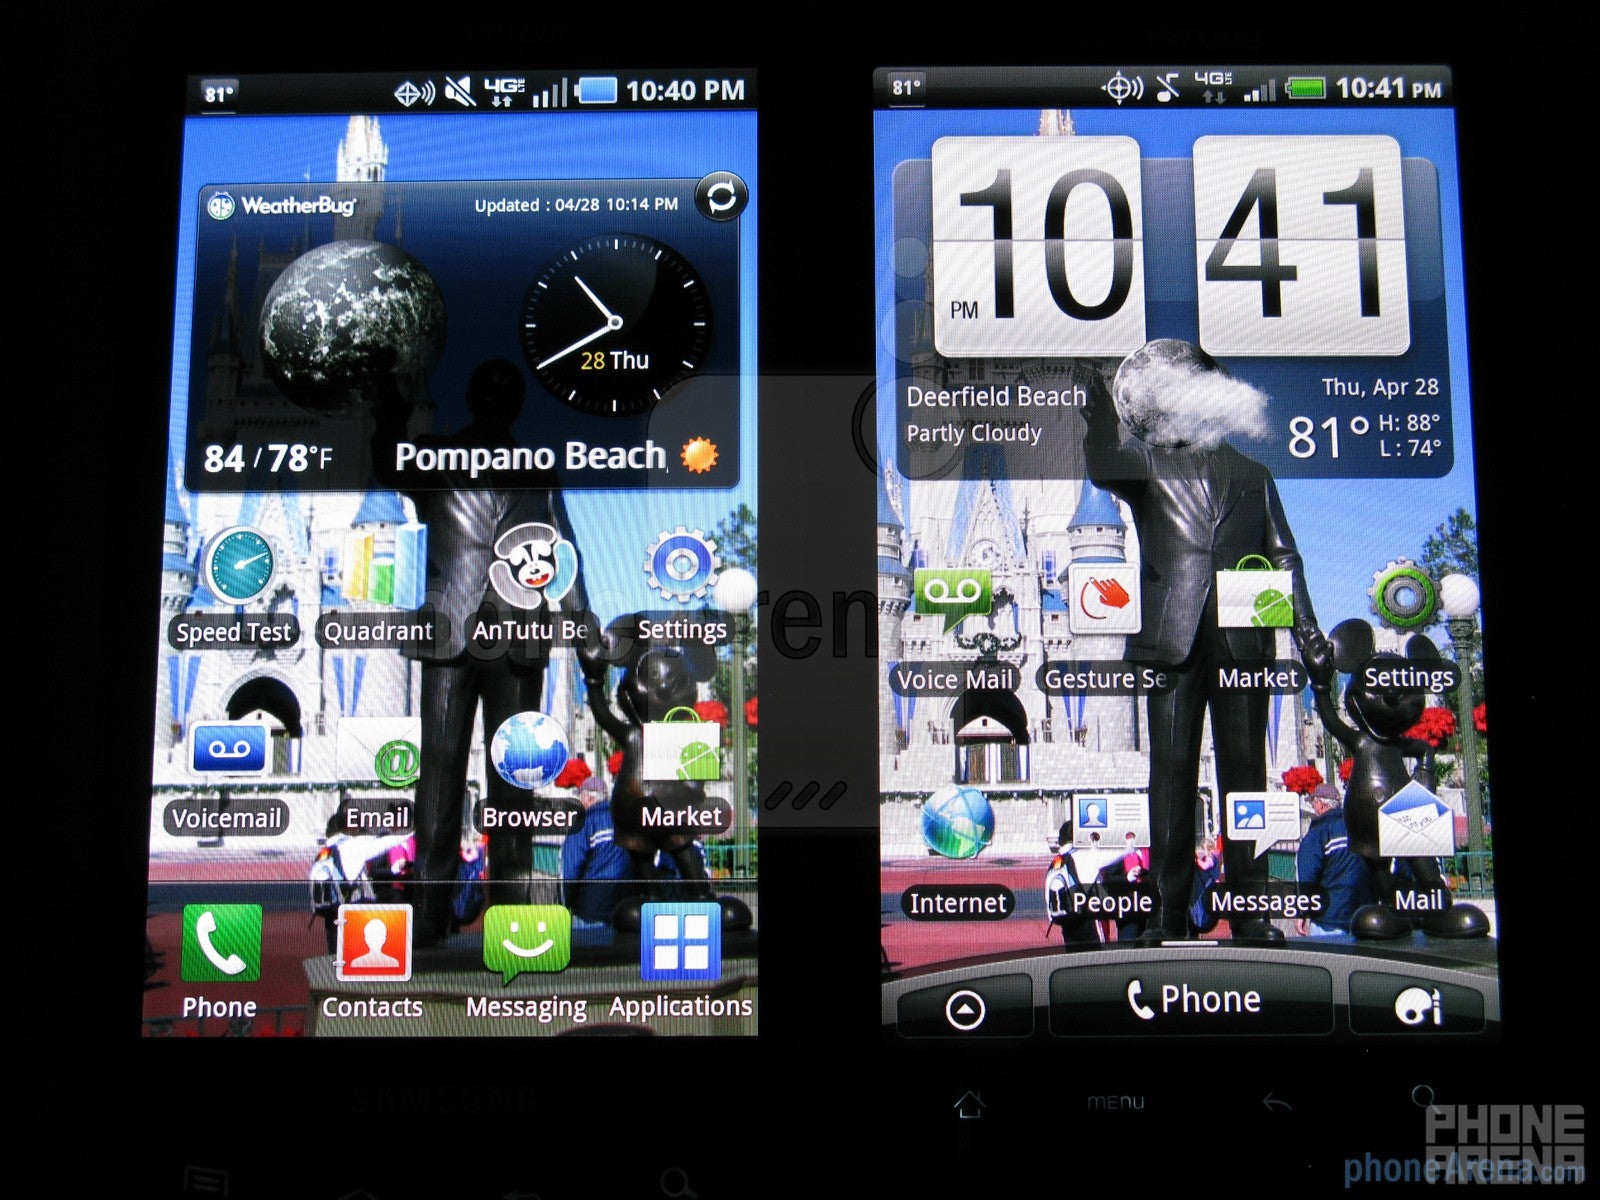 The Samsung Droid Charge (left)and the HTC ThunderBolt (right) - Samsung Droid Charge vs HTC ThunderBolt